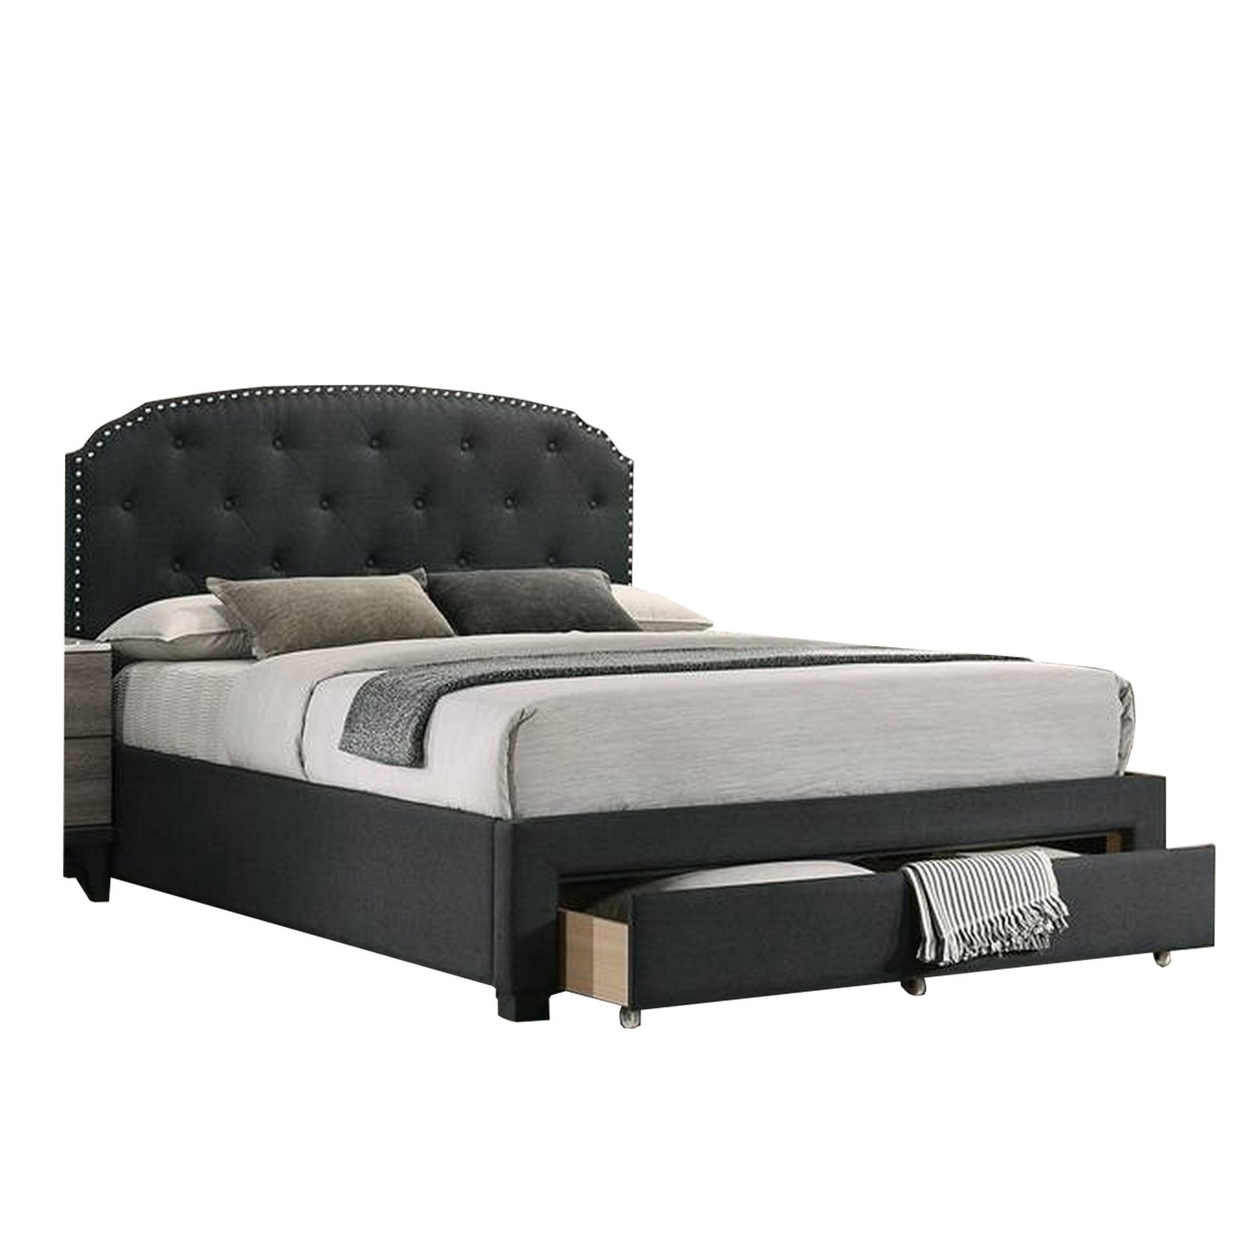 Nue Full Size Upholstered Bed, Curved Tufted Headboard, Nailhead, Charcoal- Saltoro Sherpi